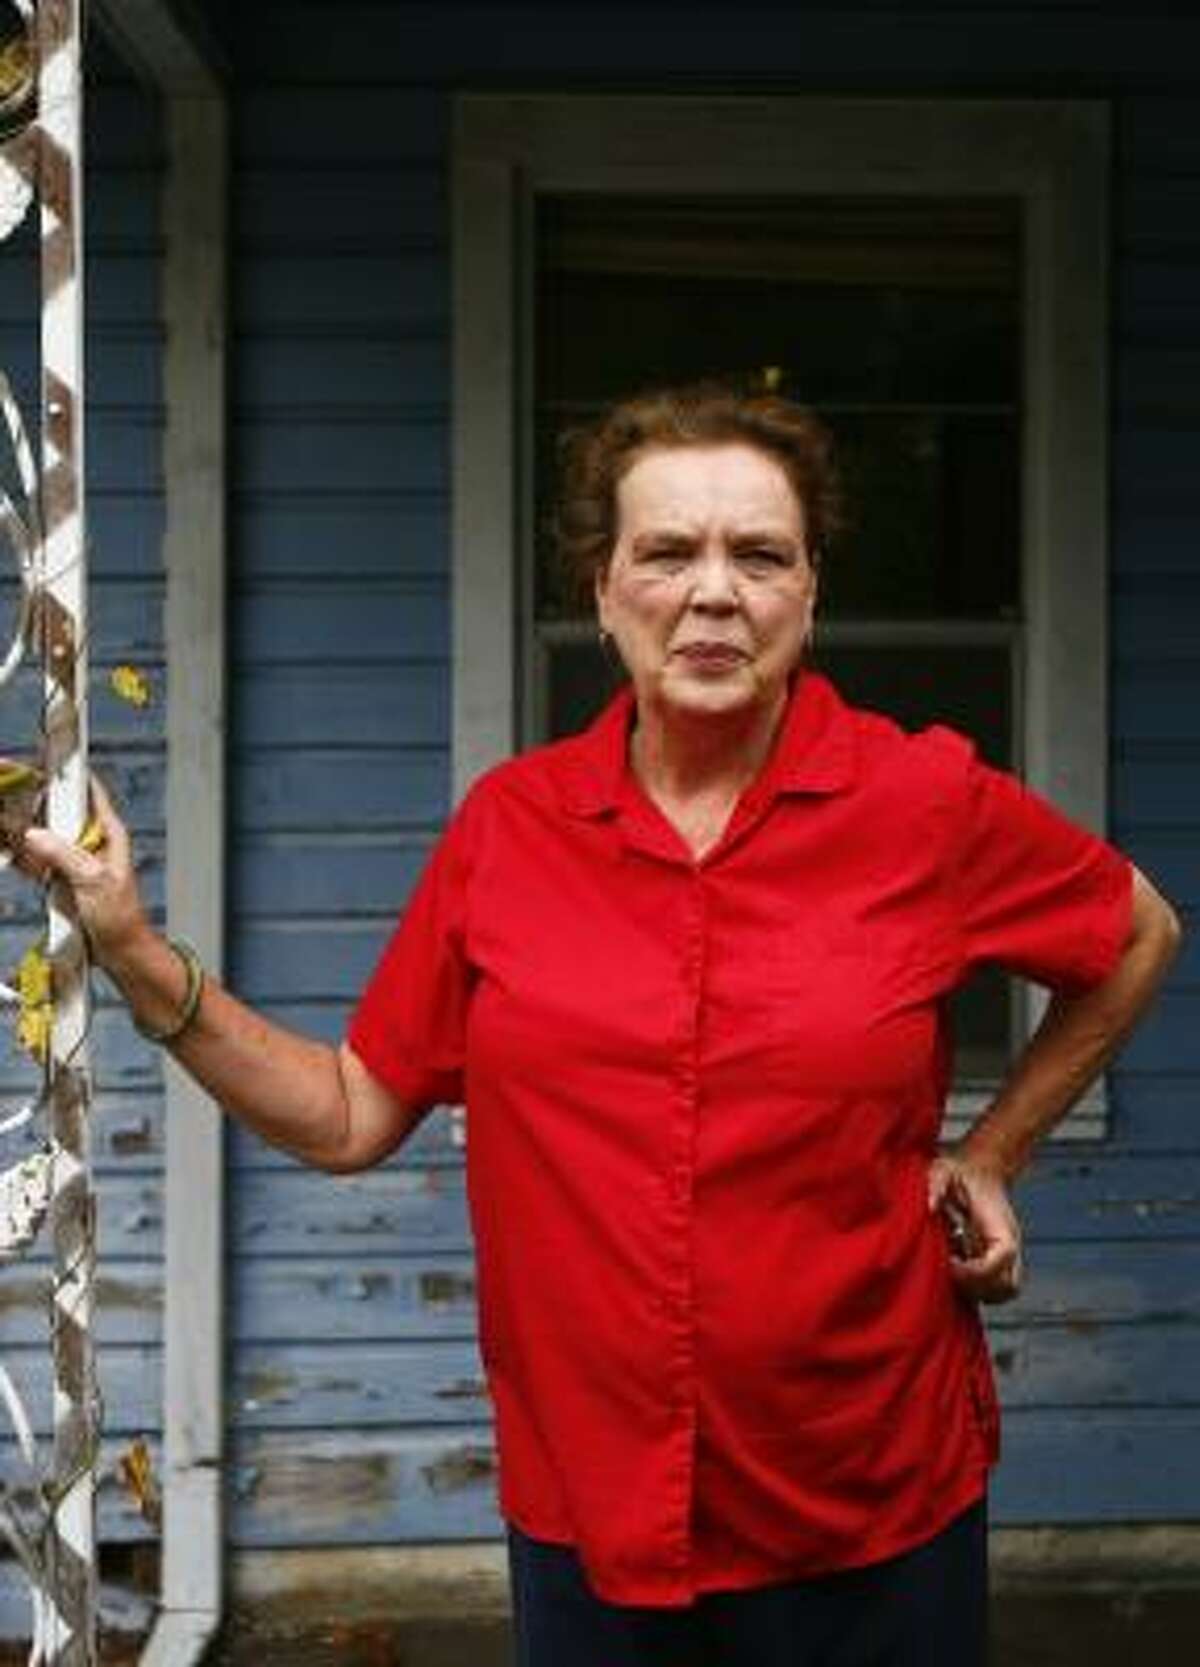 Marsha Farmer had spent nearly eight years combating mismanagement in a city-run, home repair program.